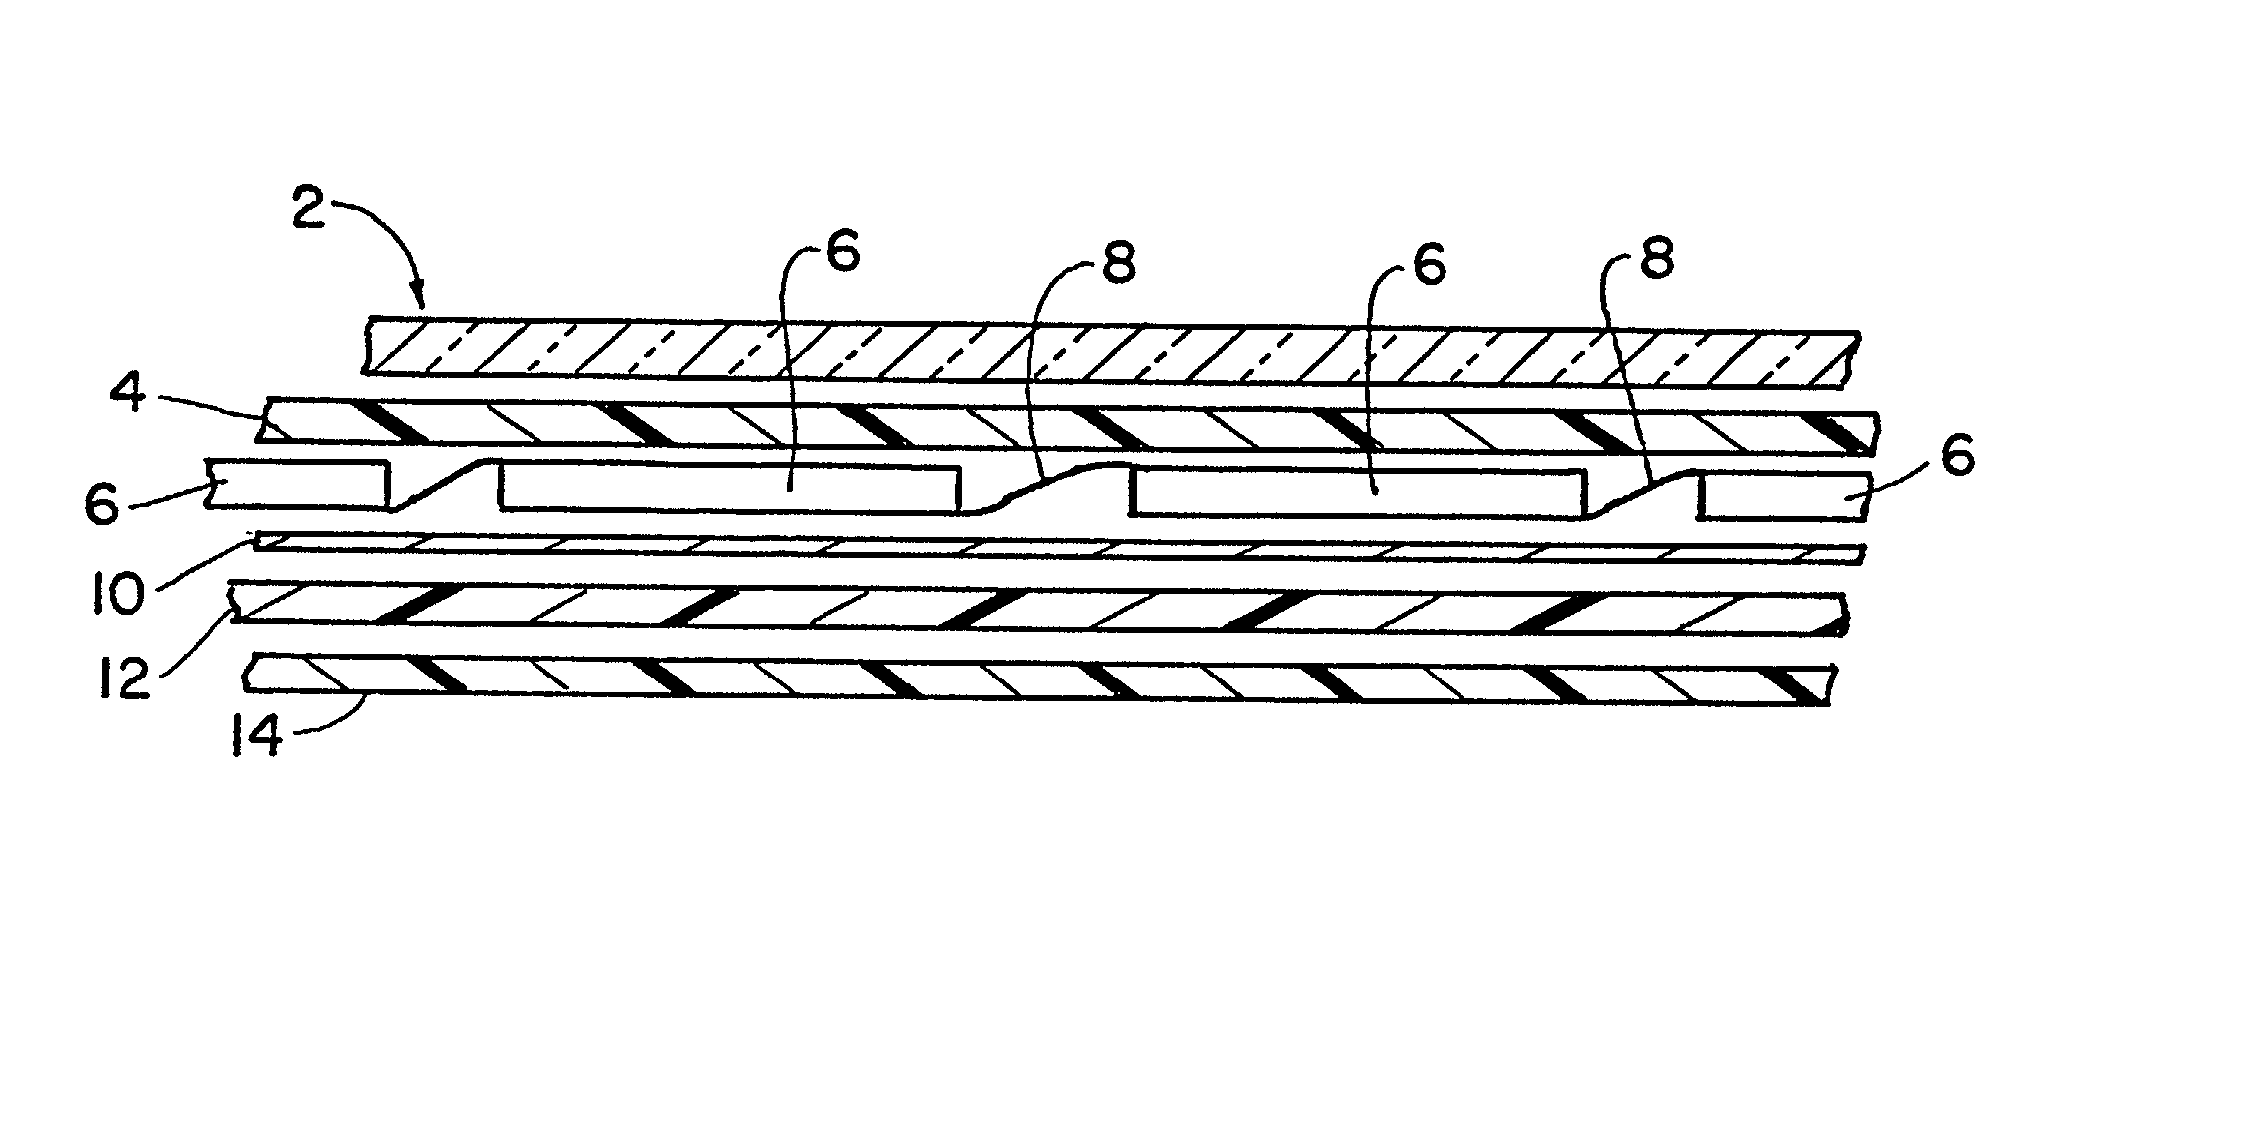 Encapsulated photovoltaic modules and method of manufacturing same